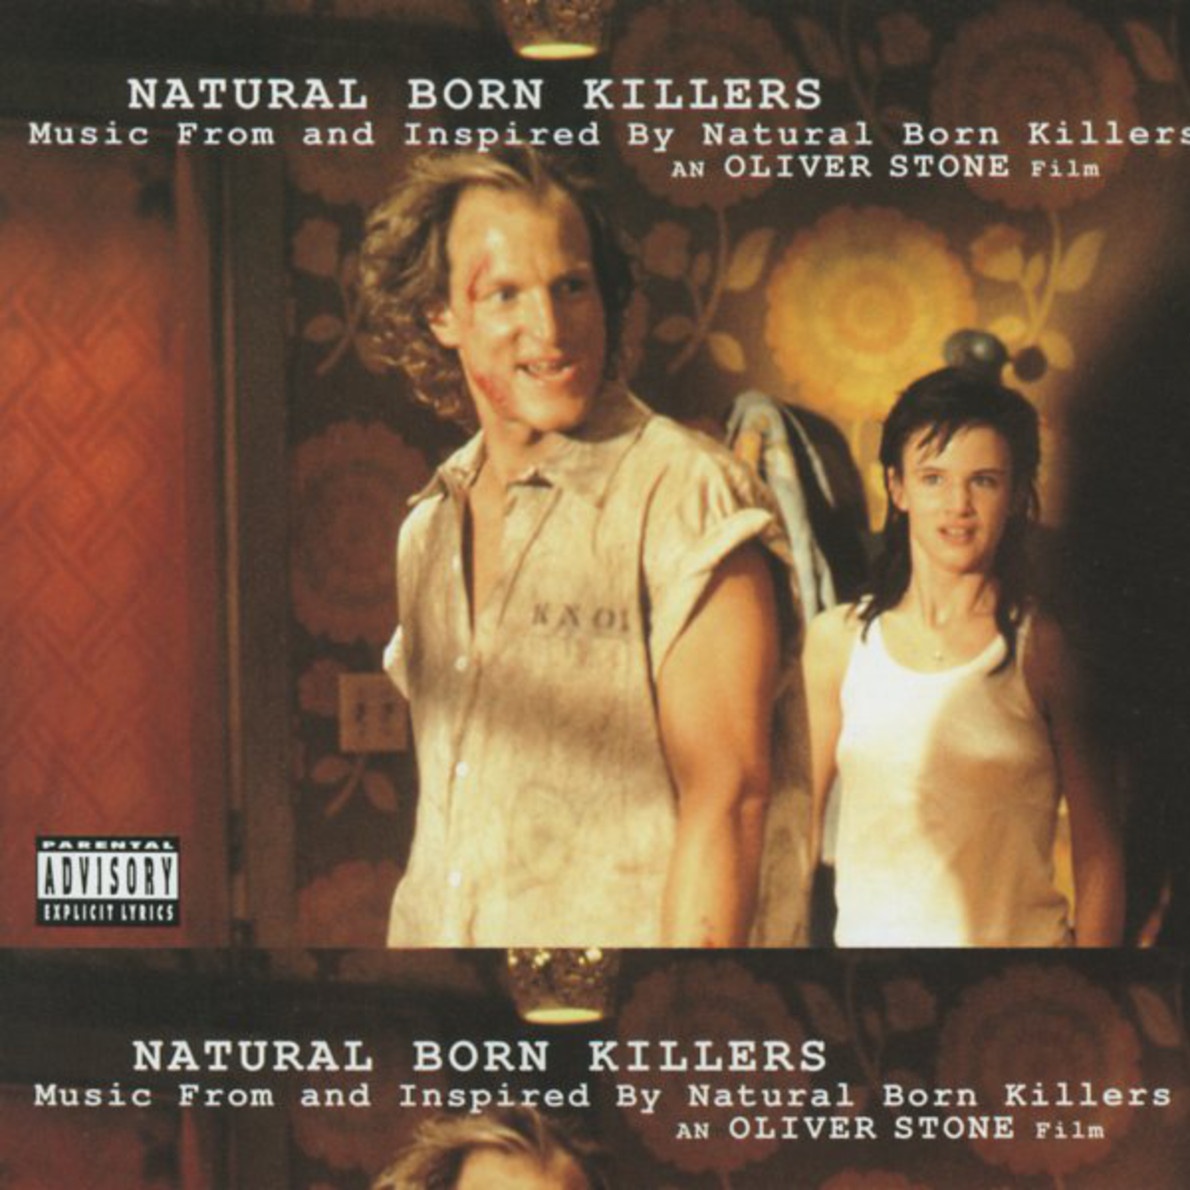 Rock N Roll Nigger - From "Natural Born Killers" Soundtrack